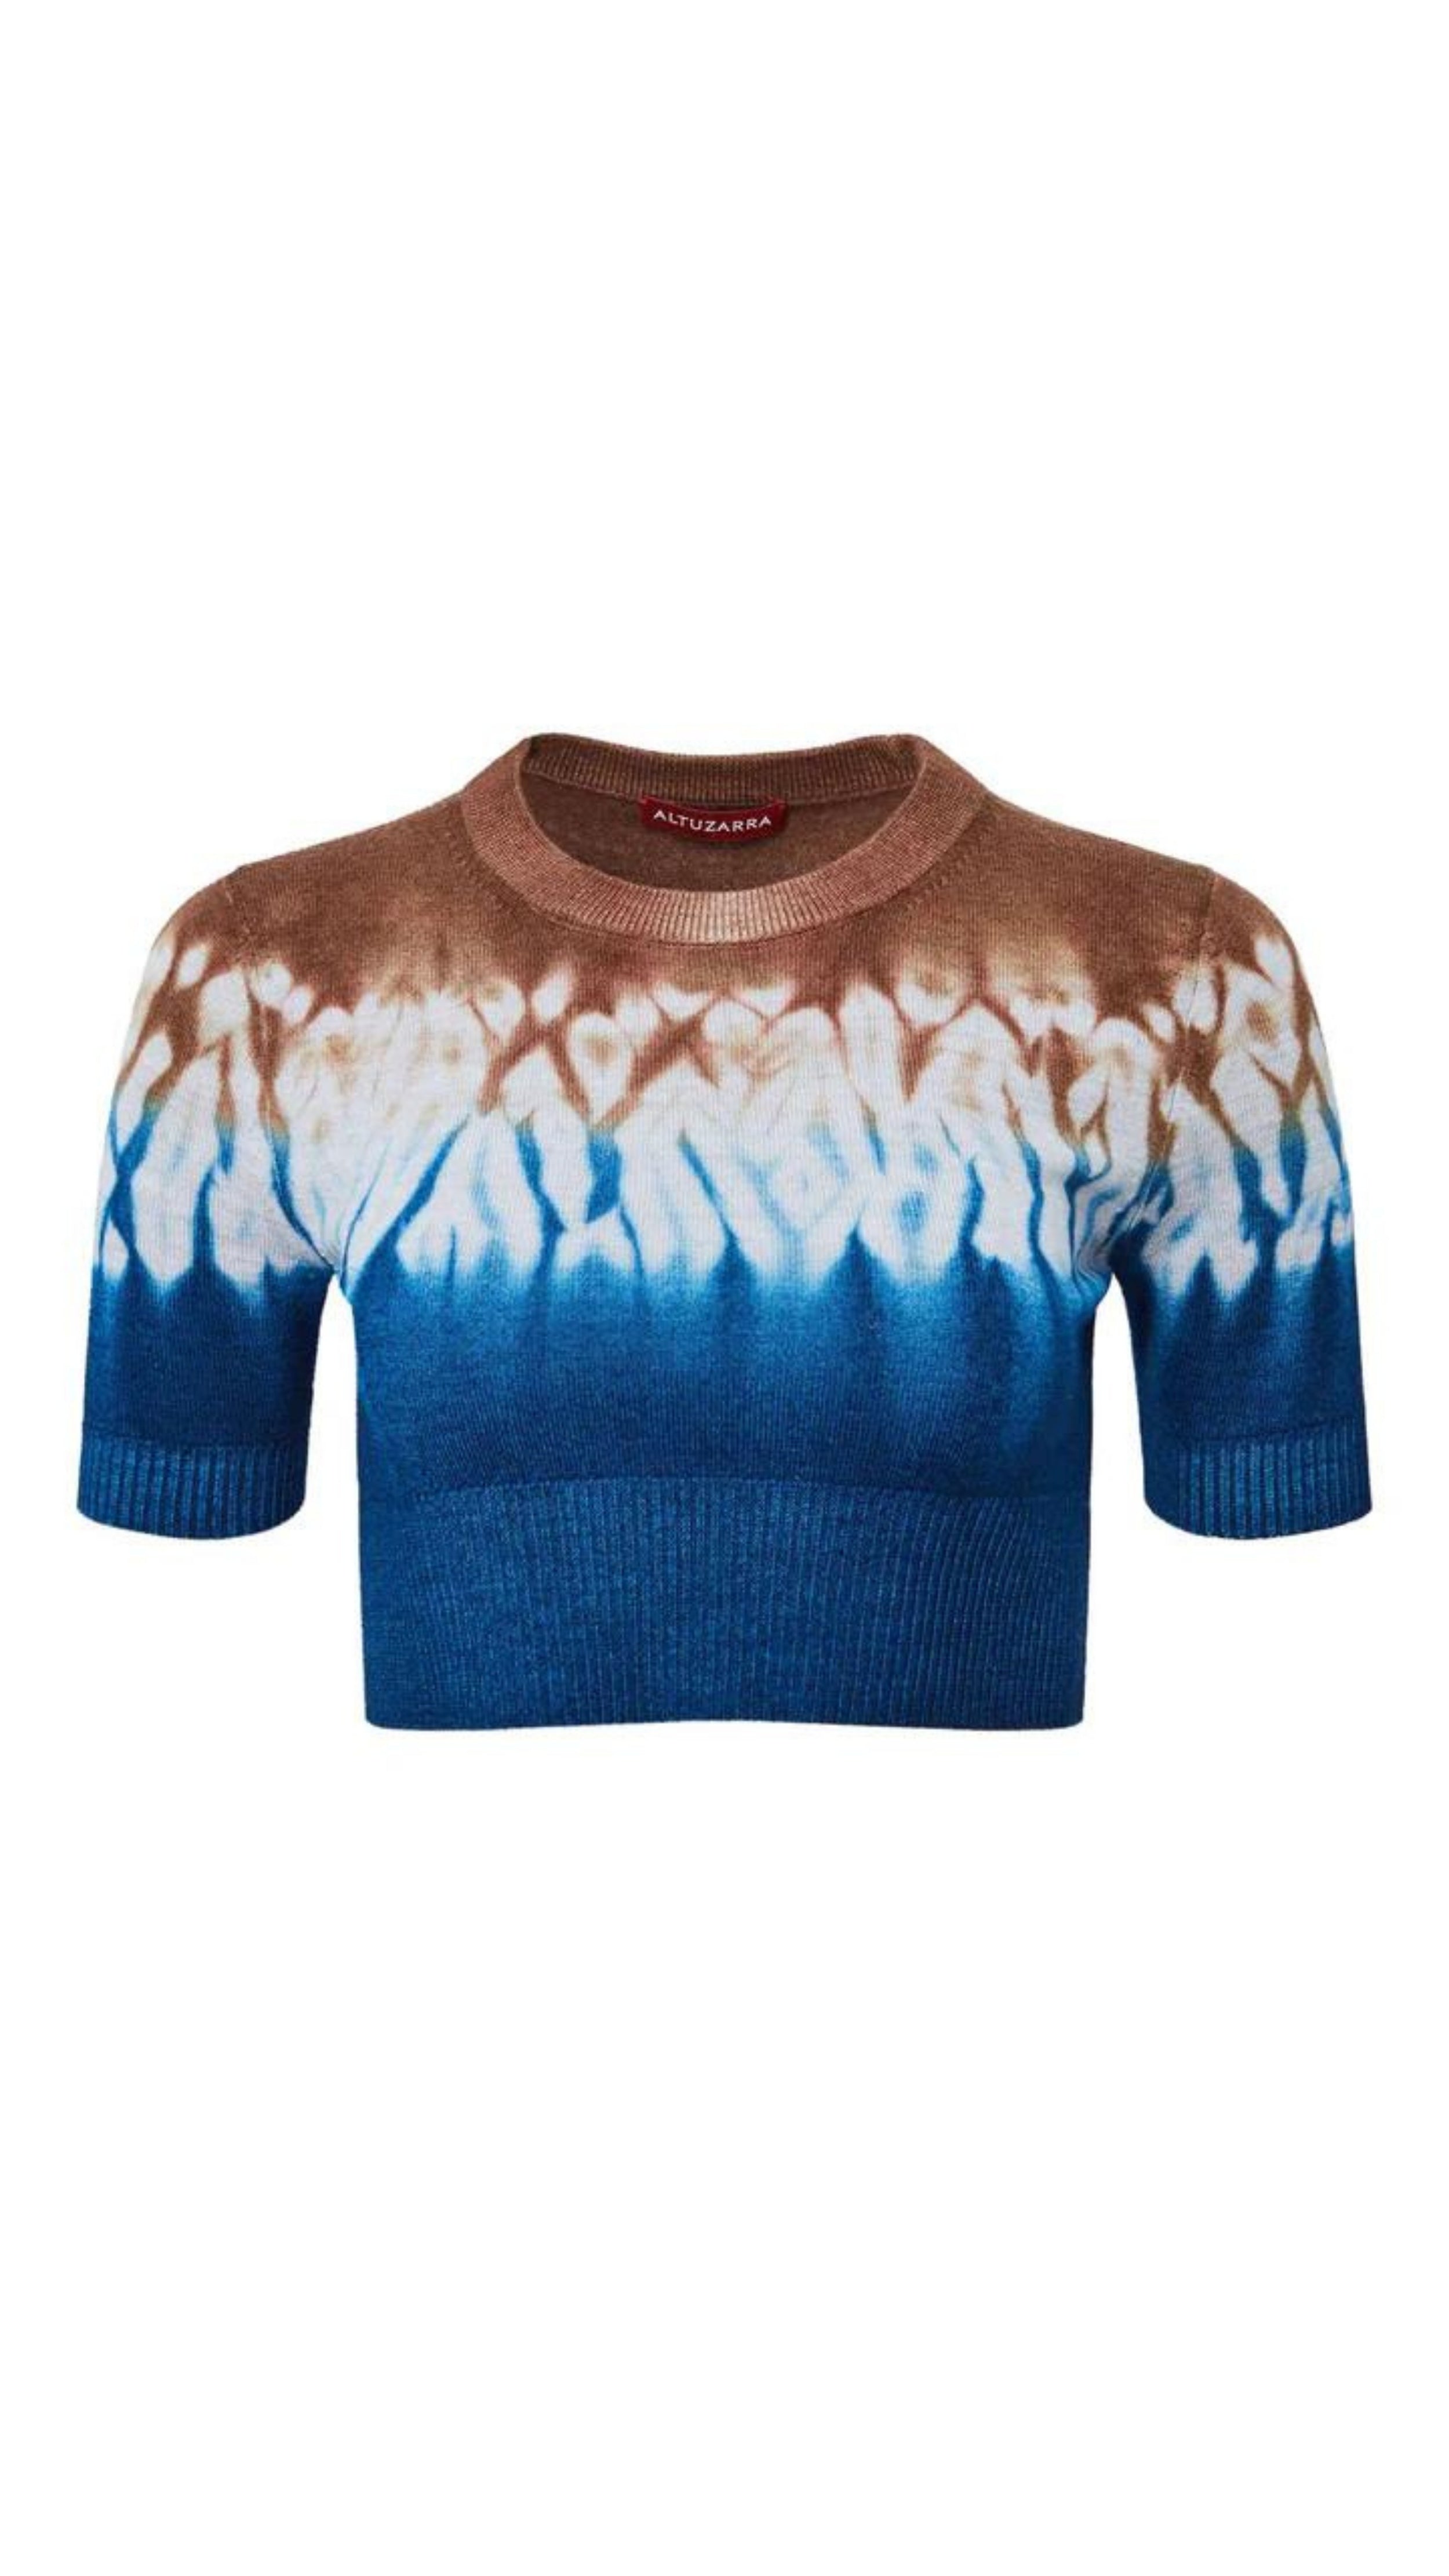 Altuzarra Nicholas Sweater. Made in Italy from soft superfine merino wool. This cropped style sweater features a unique blend of ultramarine blue and brown hues, created using Altuzarra&#39;s Shibori dyeing technique. This summer knit top features cap sleeves and a crew neckline. Shown flat from the front.